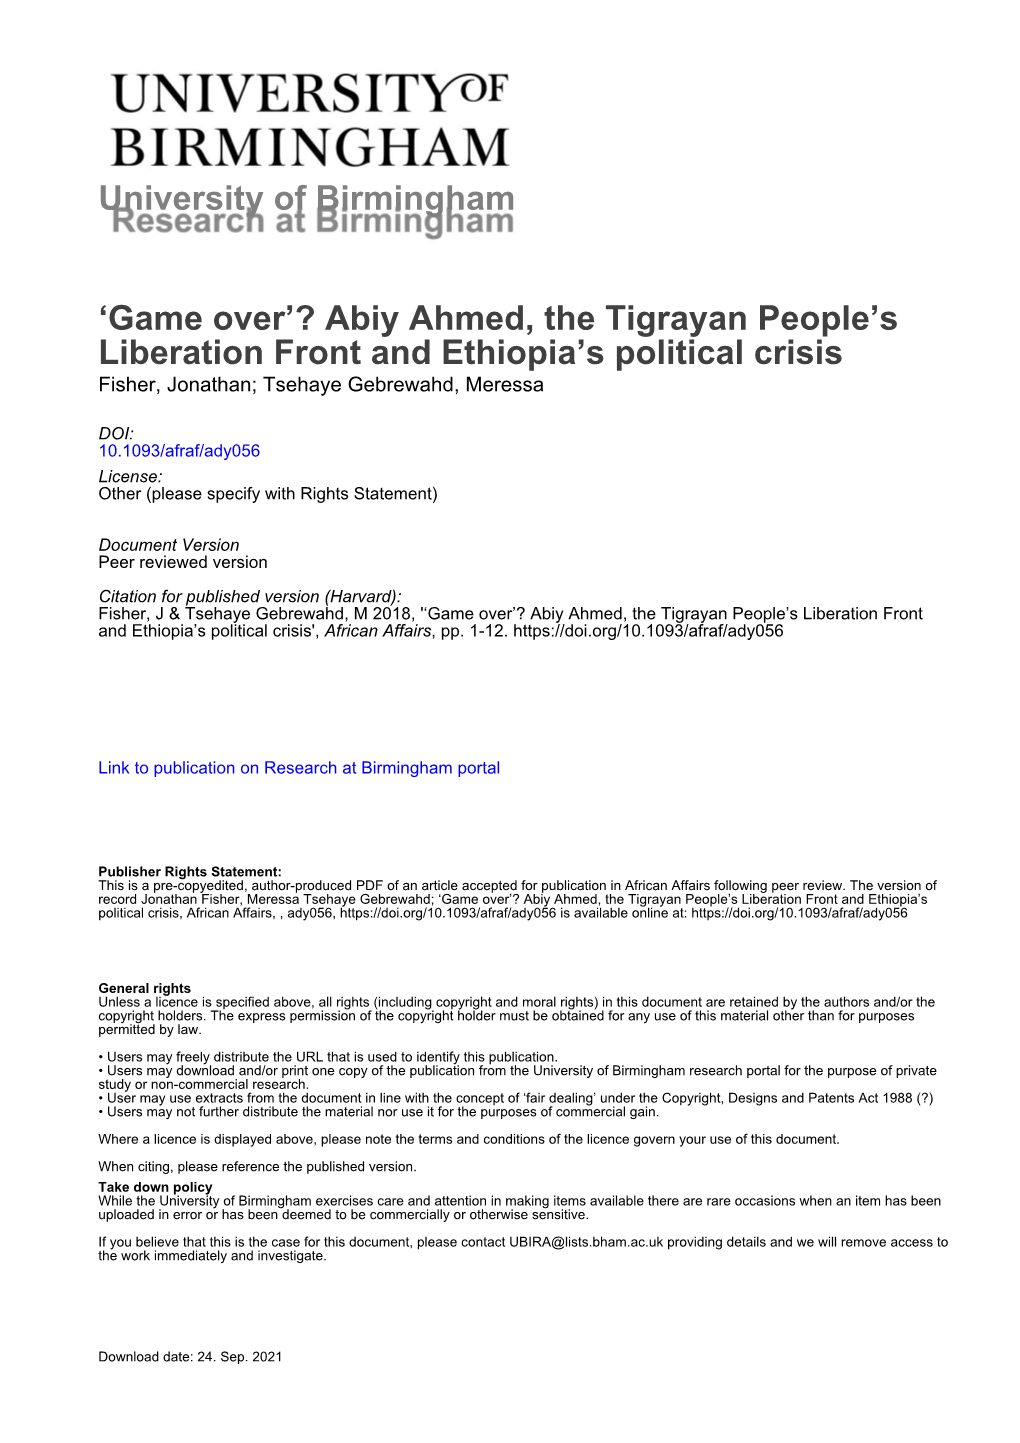 Abiy Ahmed, the Tigrayan People's Liberation Front and Ethiopia's Political Crisis